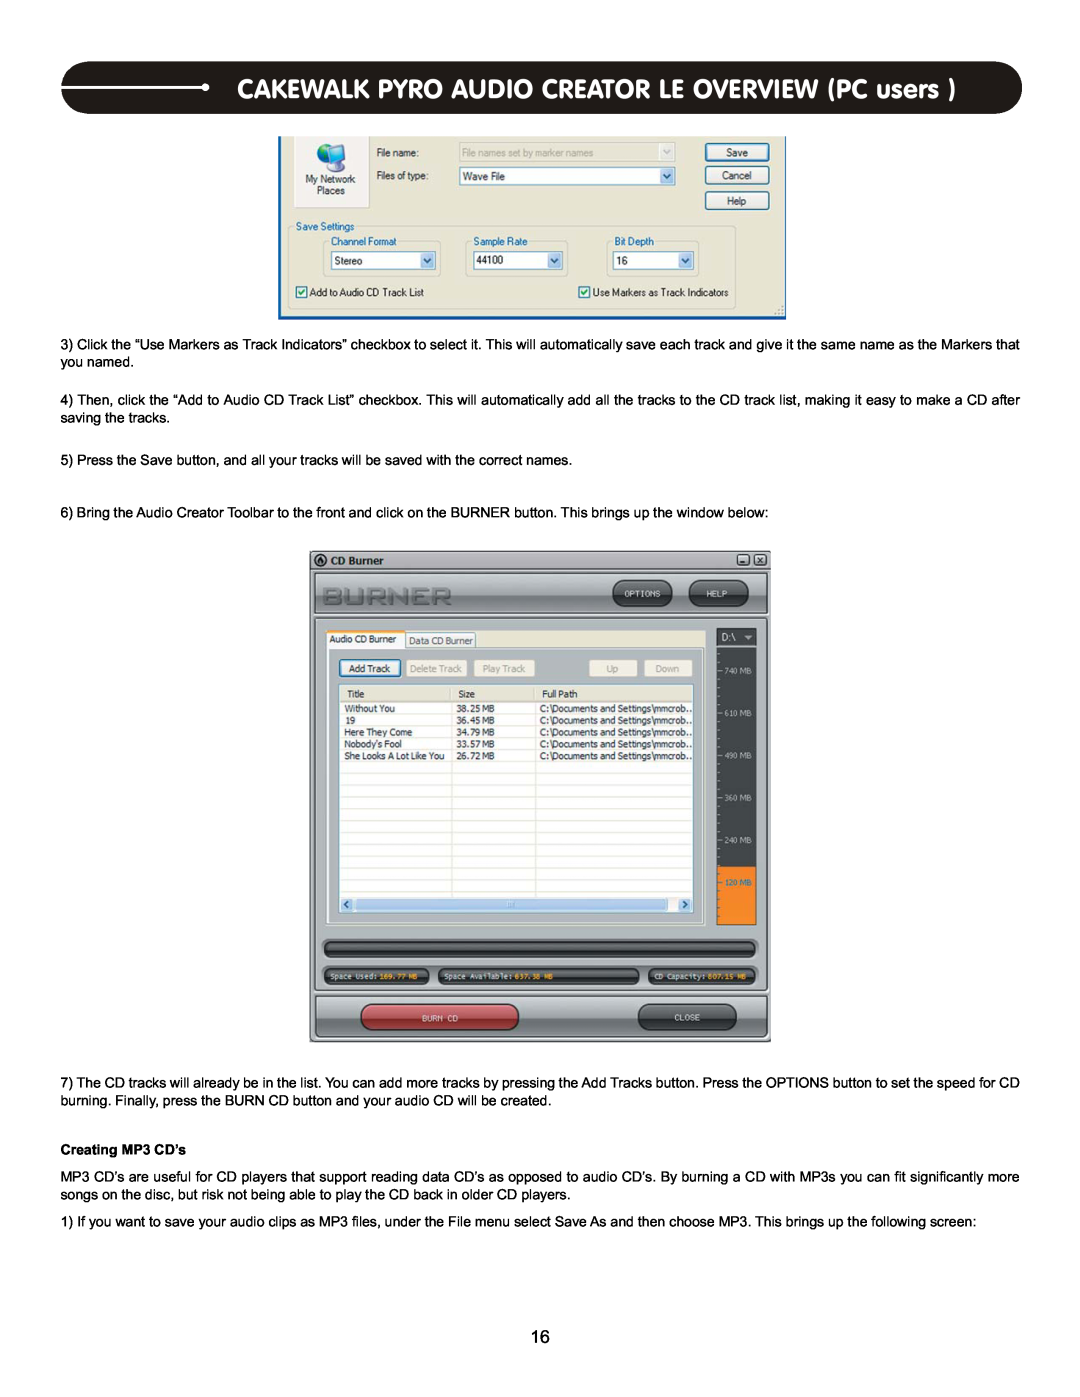 Stanton T.62 user manual CAKEWALK PYRO AUDIO CREATOR LE OVERVIEW PC users, Creating MP3 CD’s 